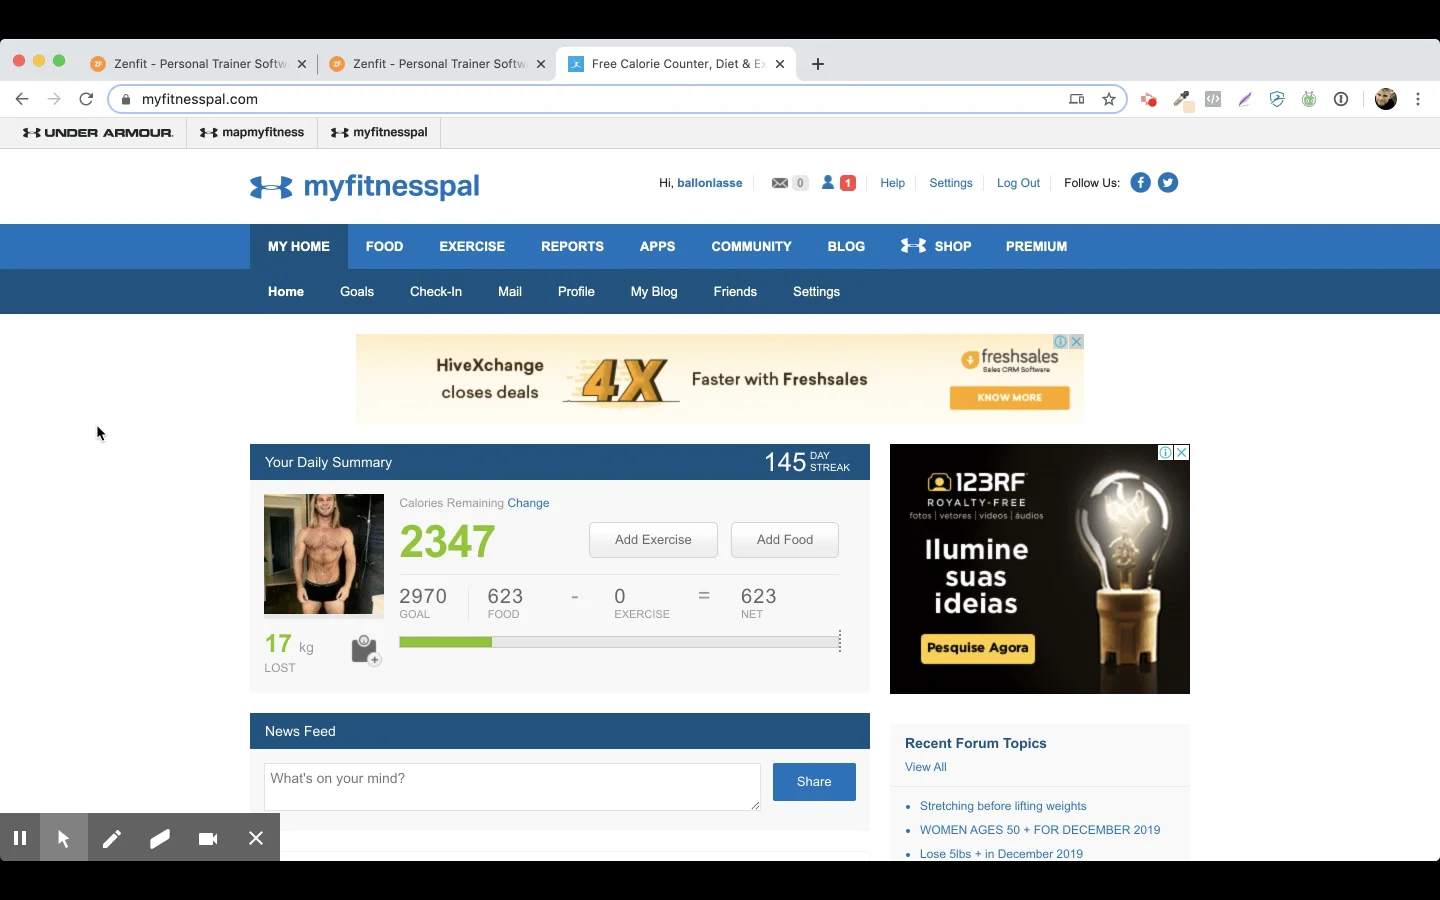 MyFitnessPal For Personal Trainers